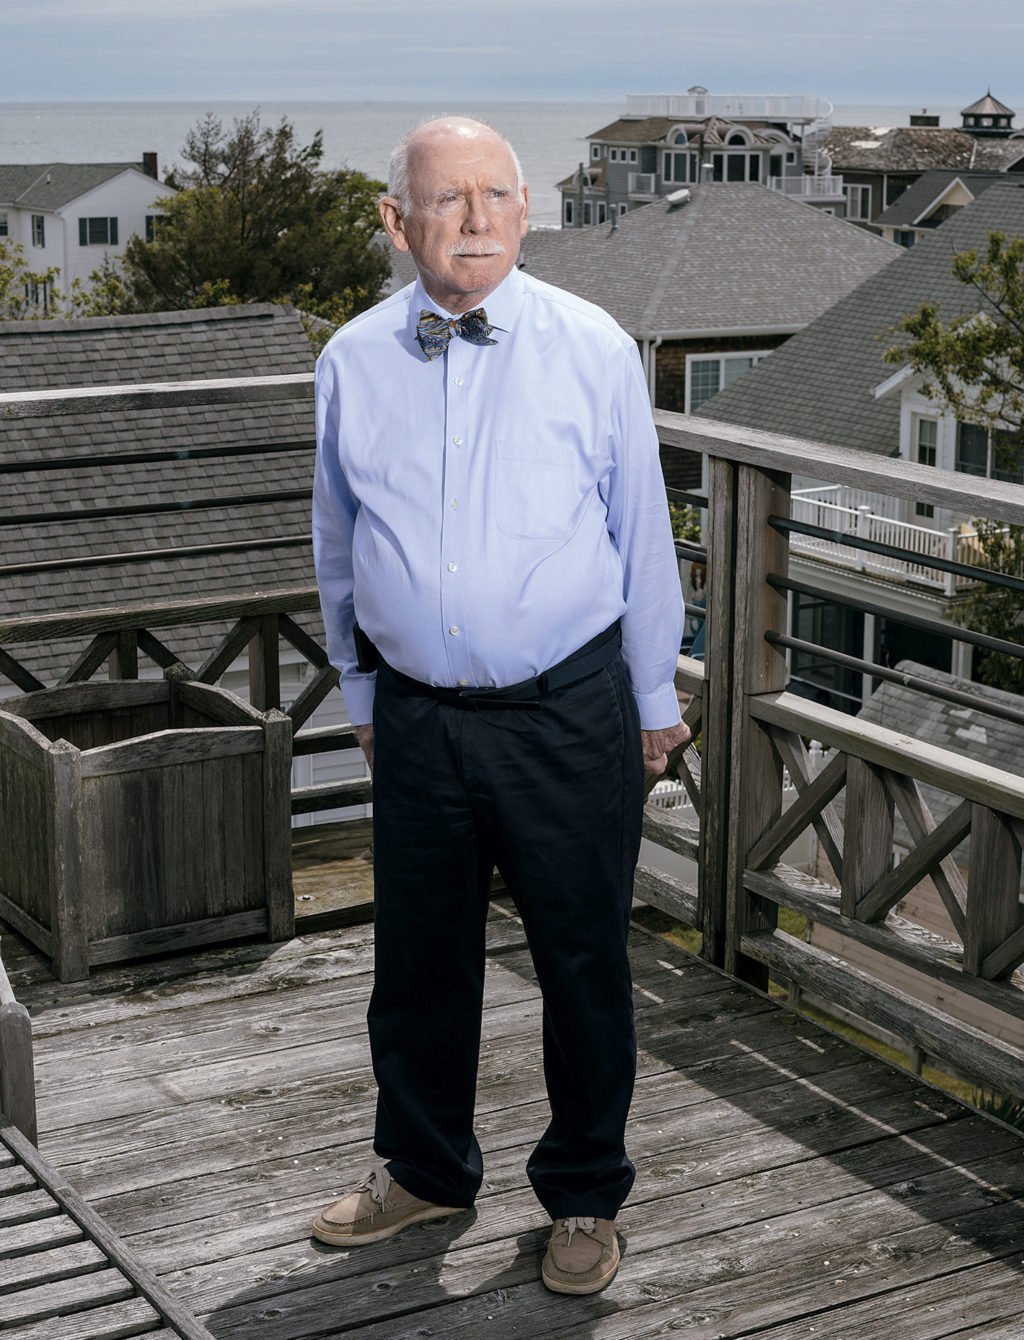 Gene Lawson–whose backyard backs up to that of his arch-nemesis, Mayor Sam Cooper–has repeatedly sued the town over property-rights issues. Photograph by Lexey Swall.